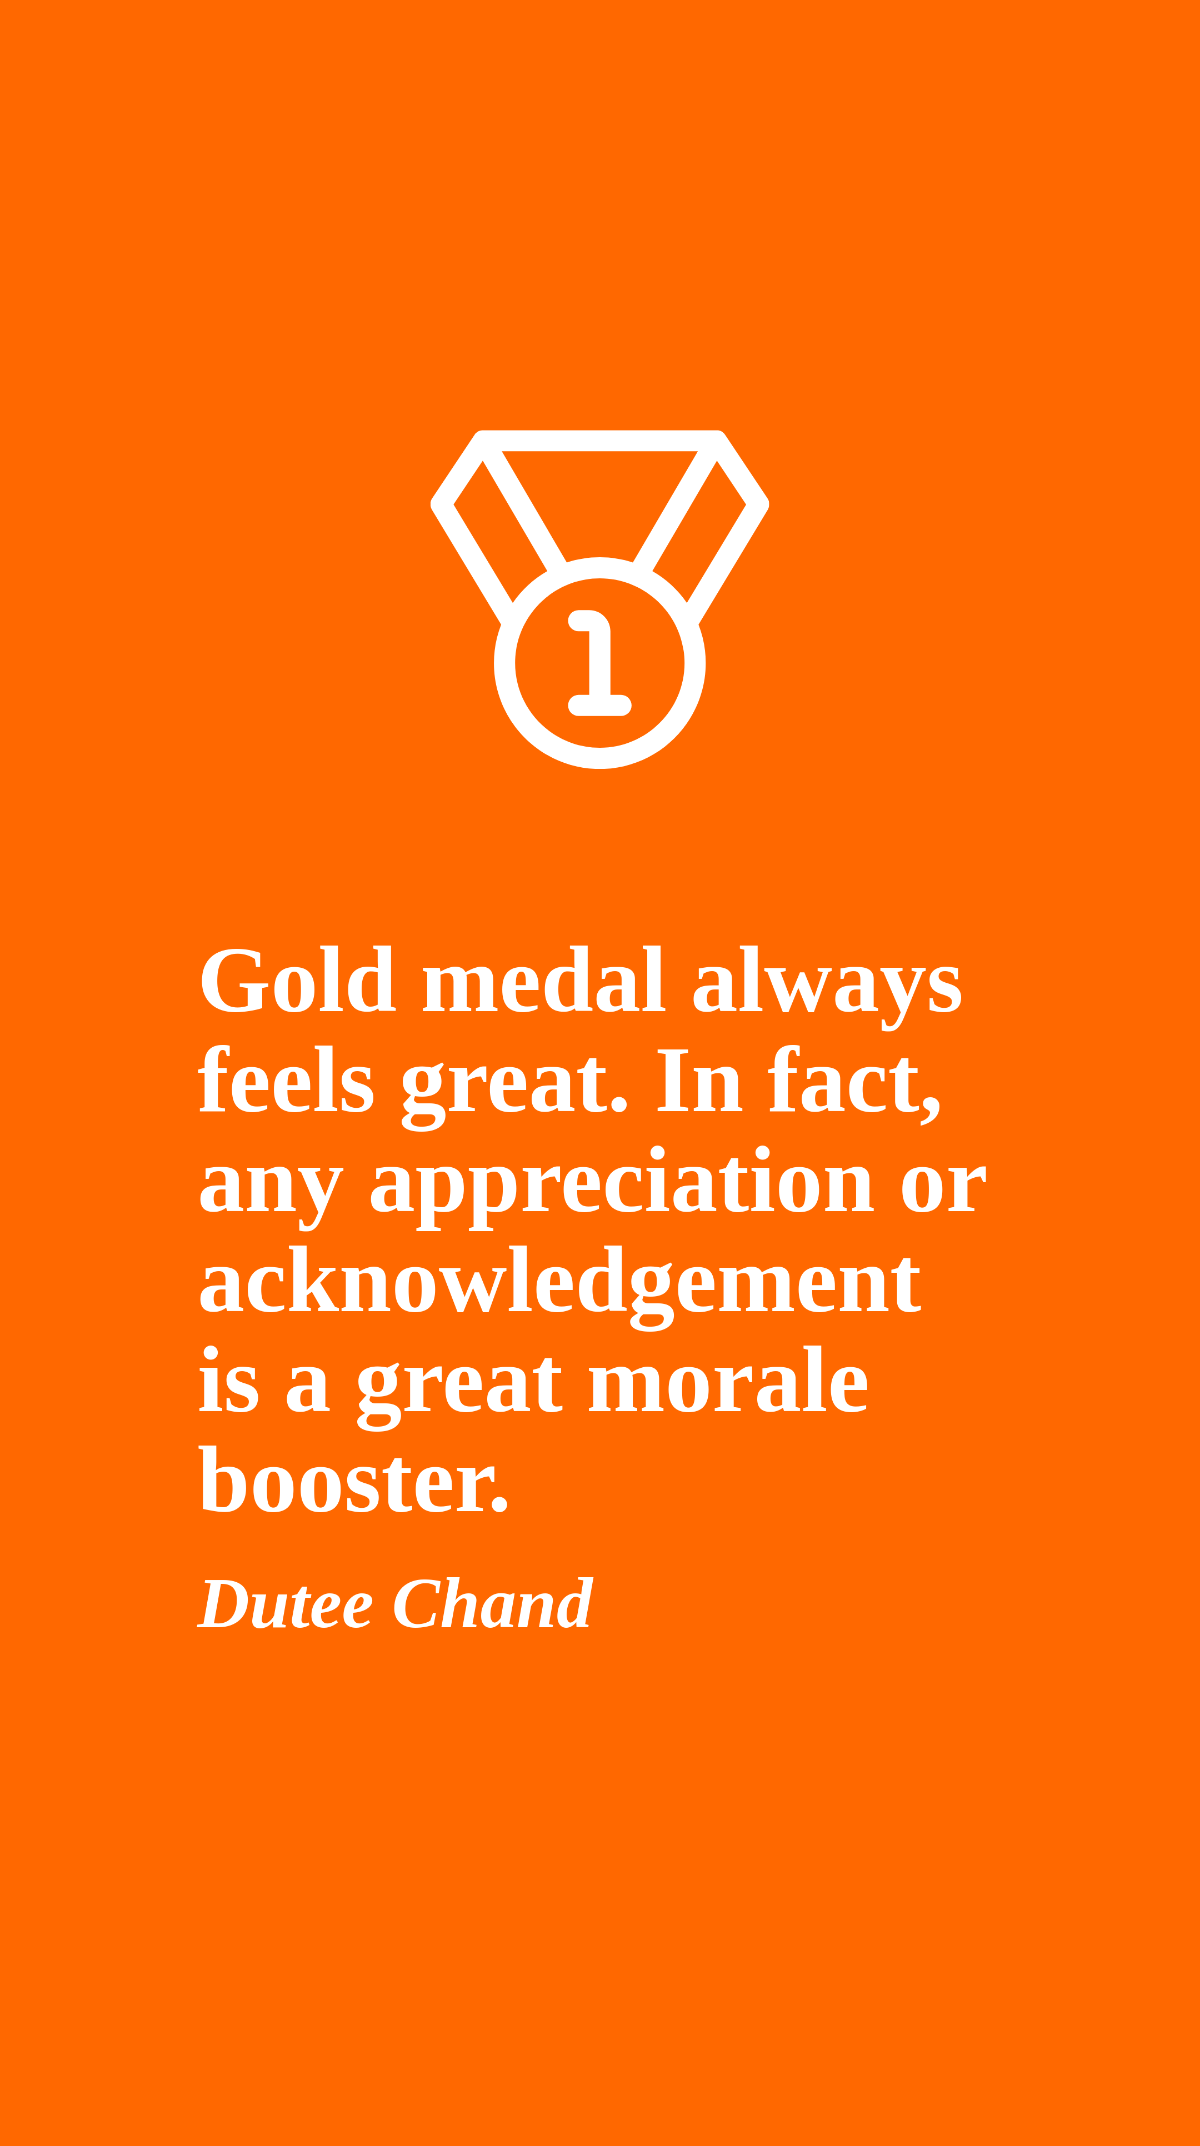 Free Dutee Chand - Gold medal always feels great. In fact, any appreciation or acknowledgement is a great morale booster. Template